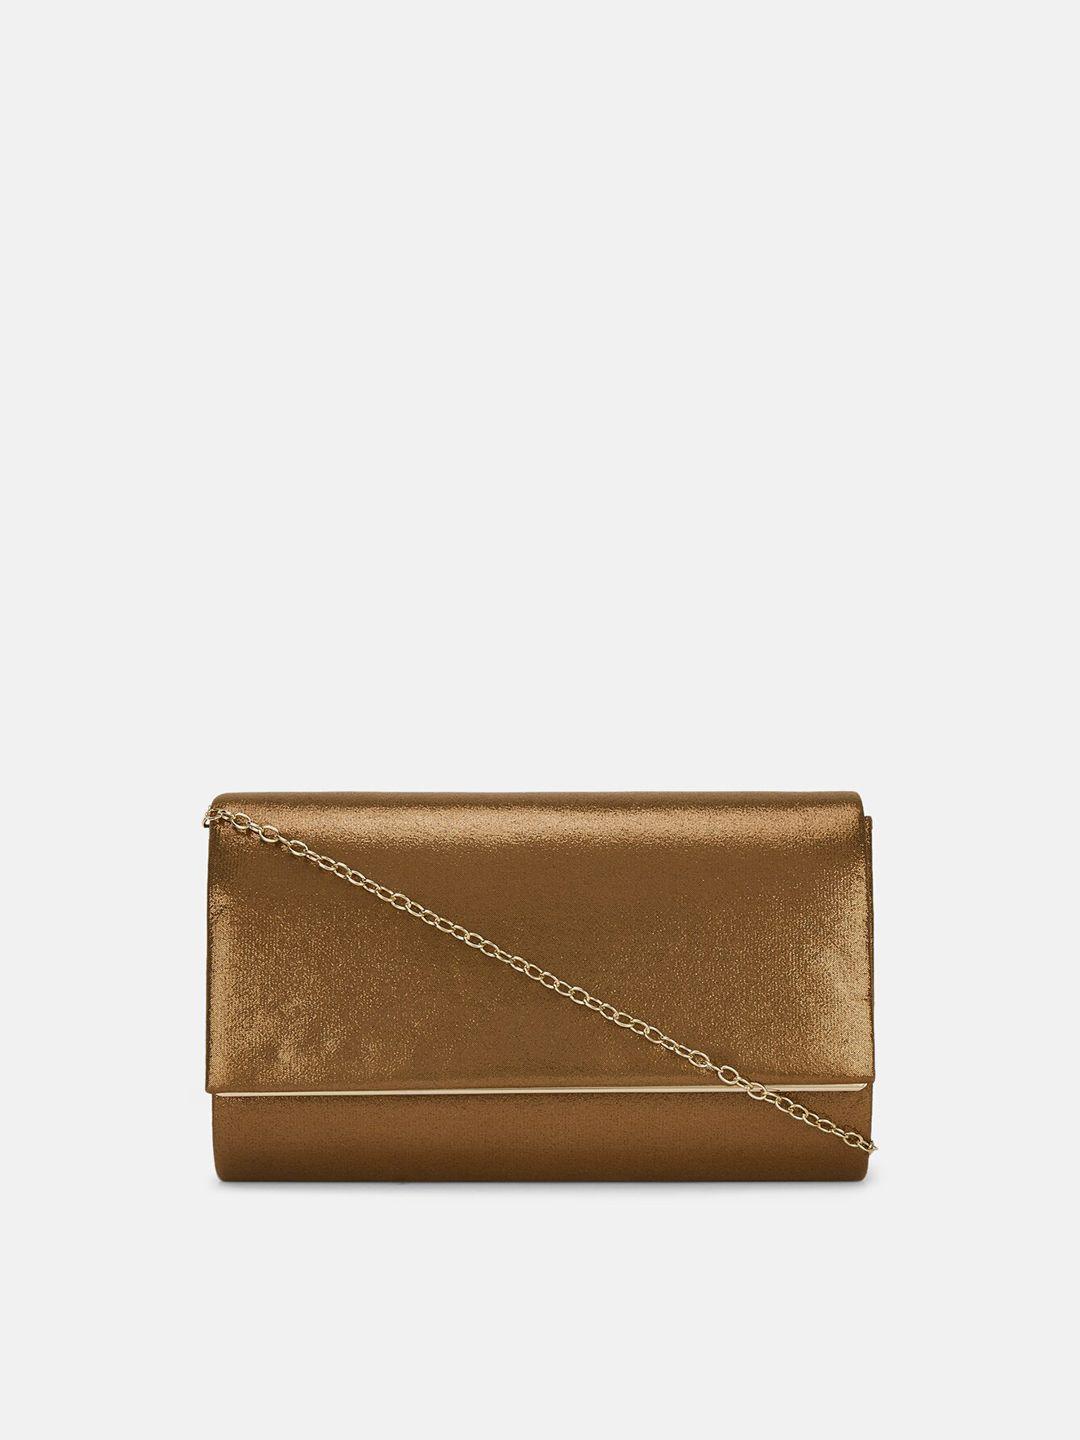 forever glam by pantaloons bronze-toned potli clutch